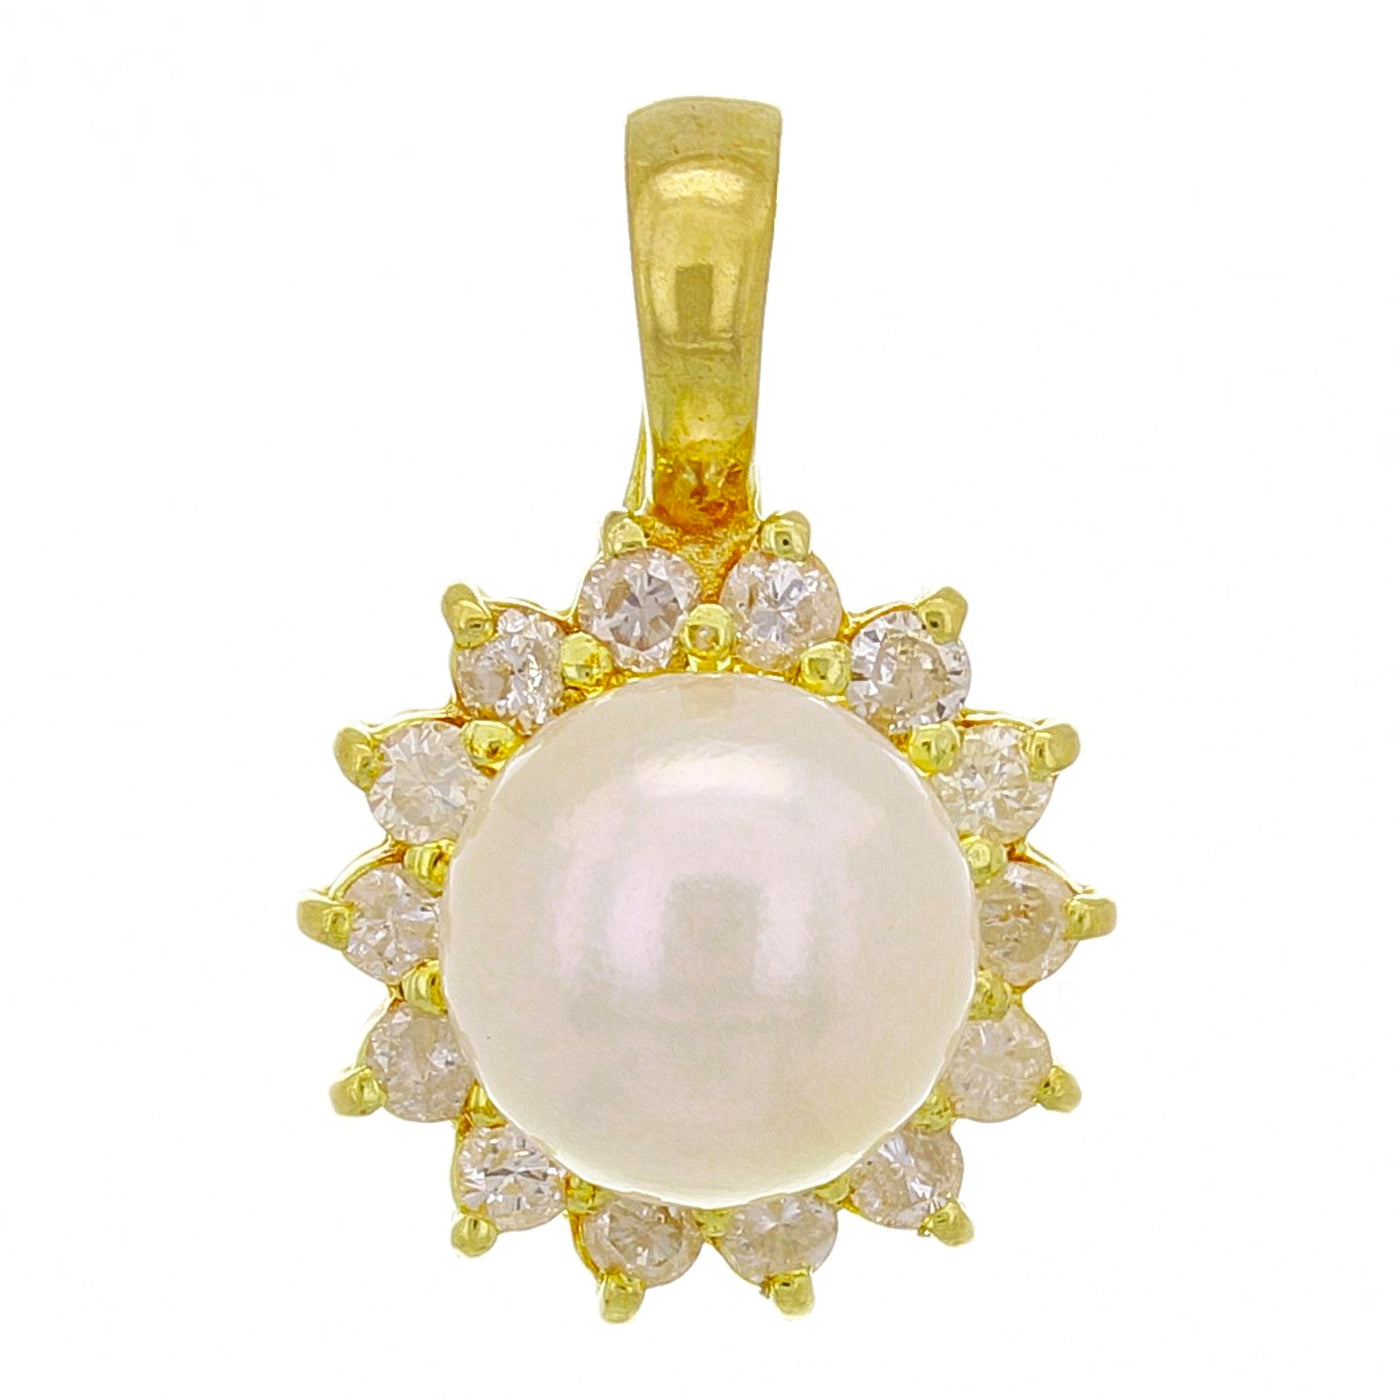 A gorgeous pearl pendant surrounded by an intricate gold design.